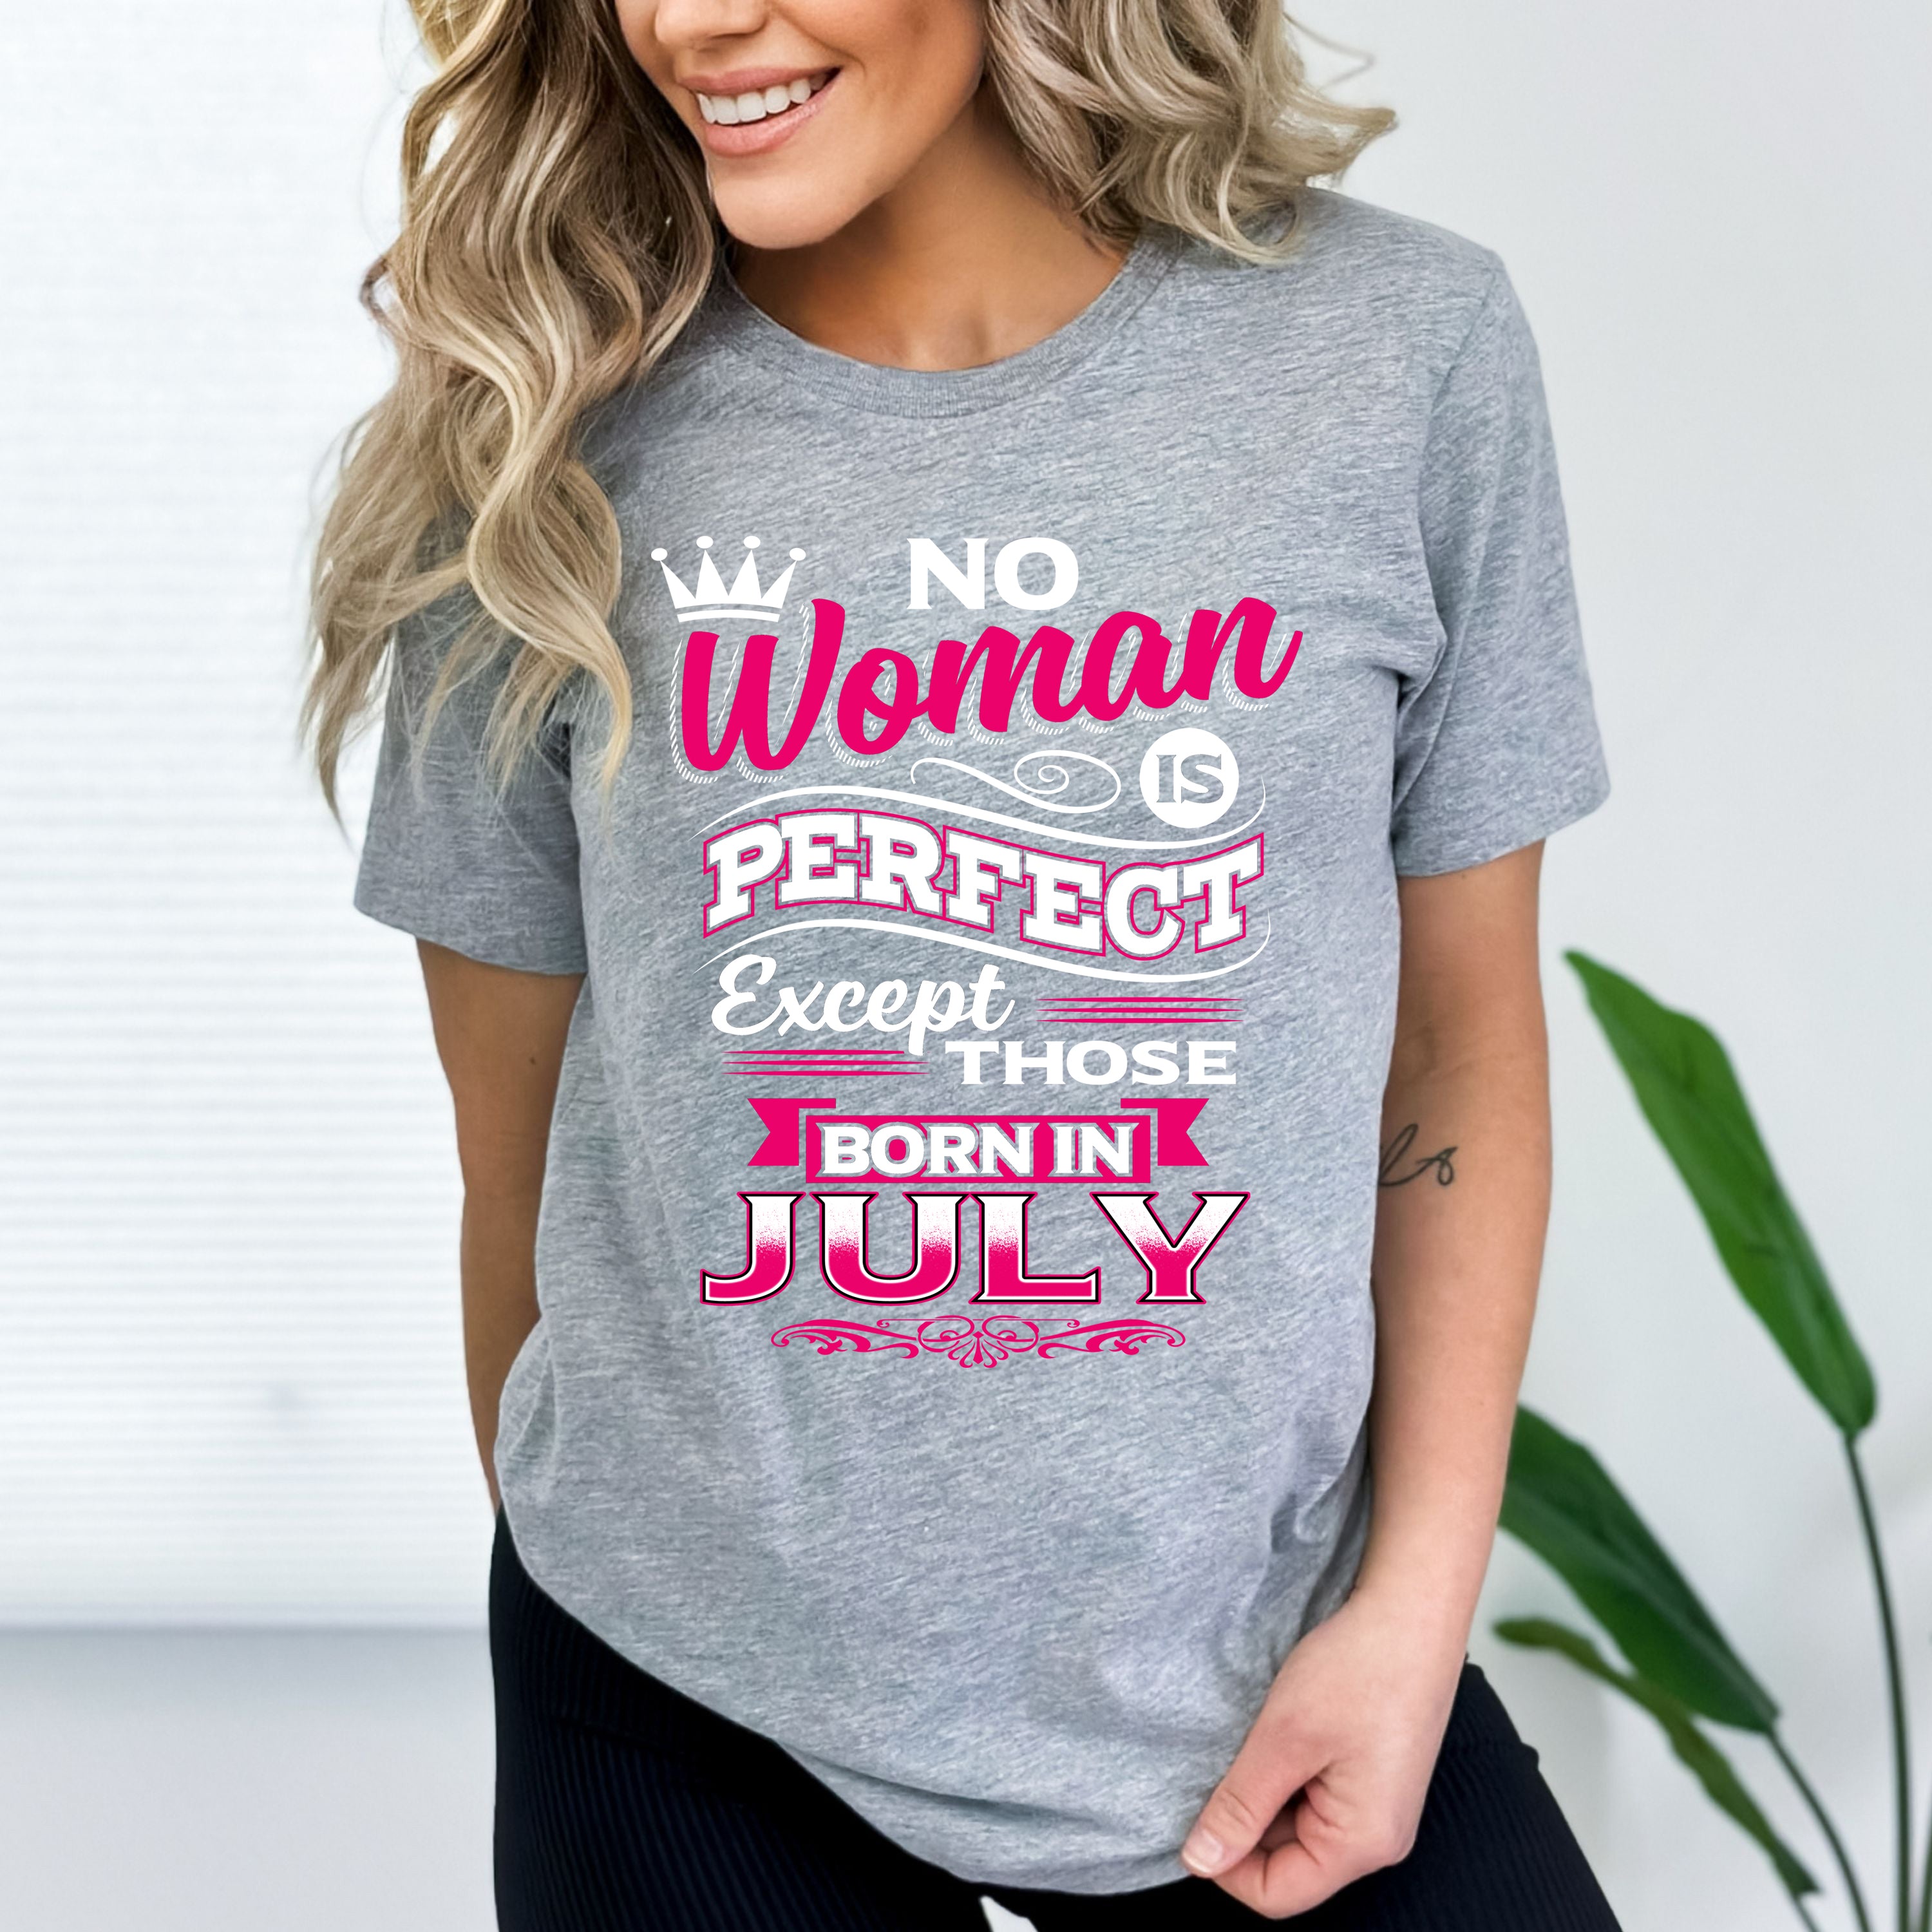 "No Woman Is Perfect Except Those Born In July"